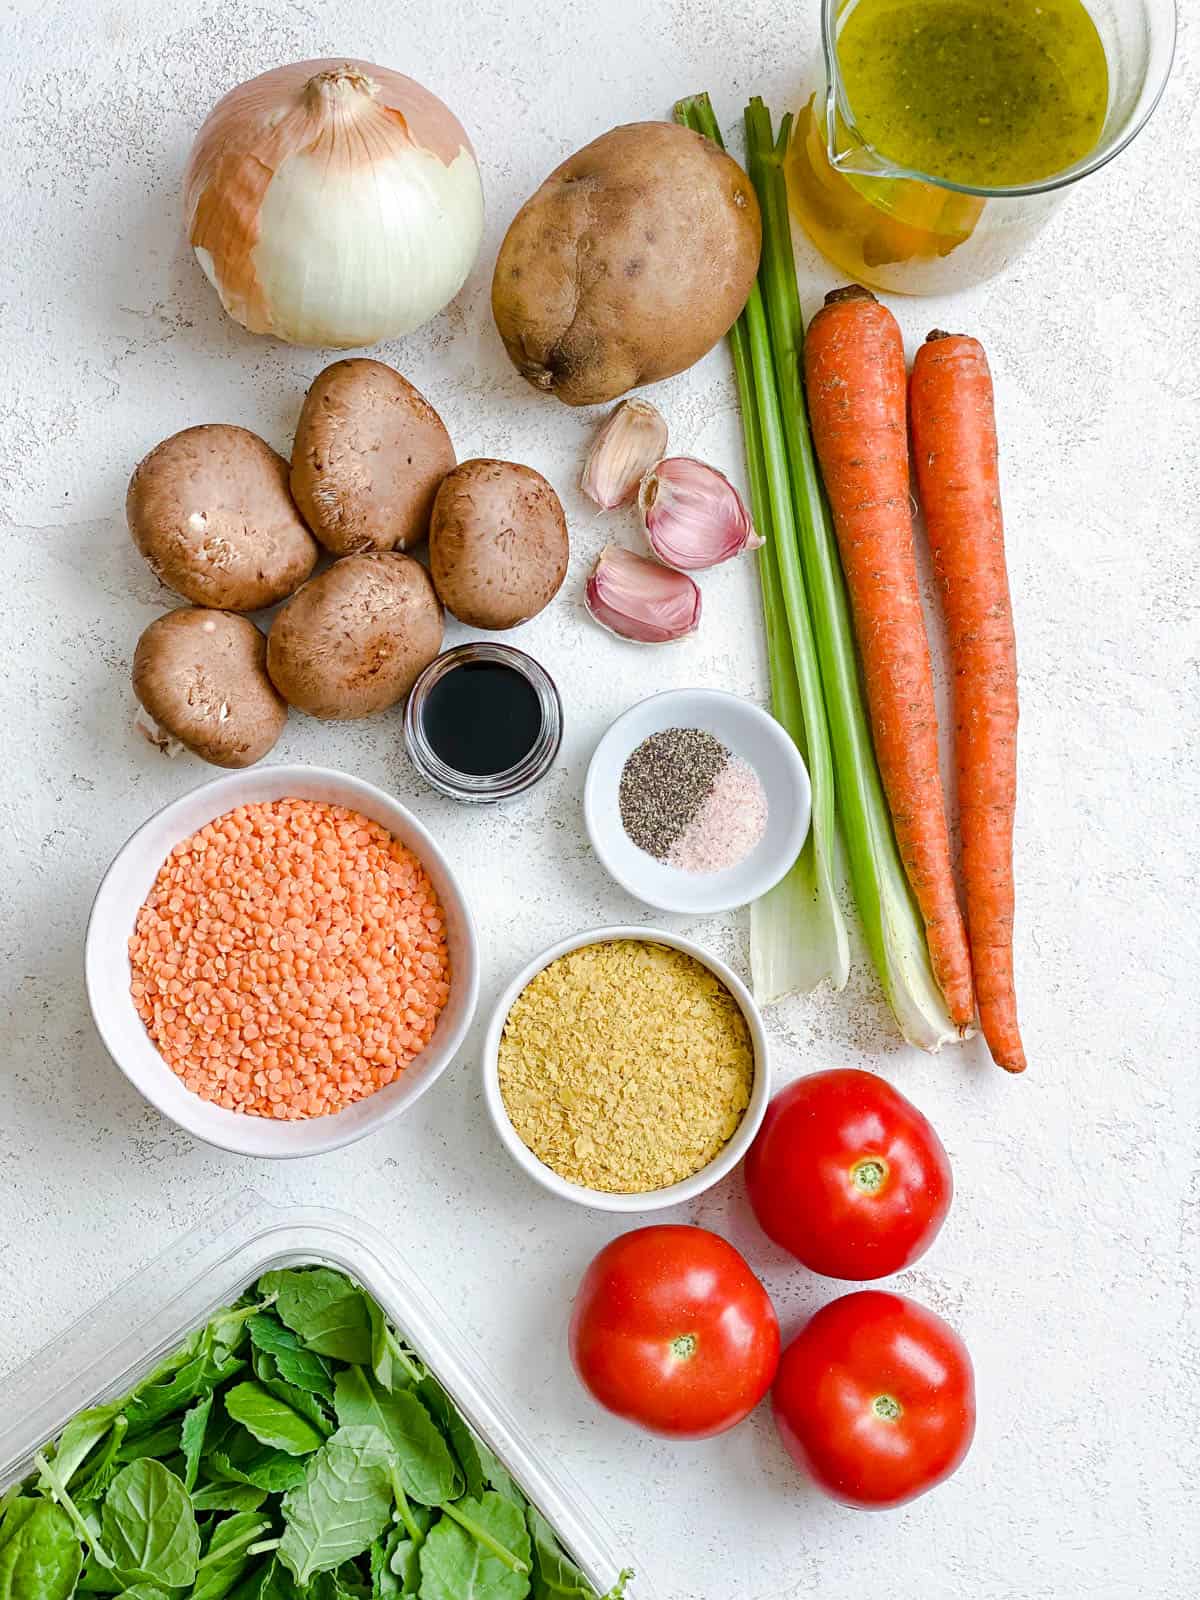 ingredients for Hearty Red Lentil Stew measured out against a white surface